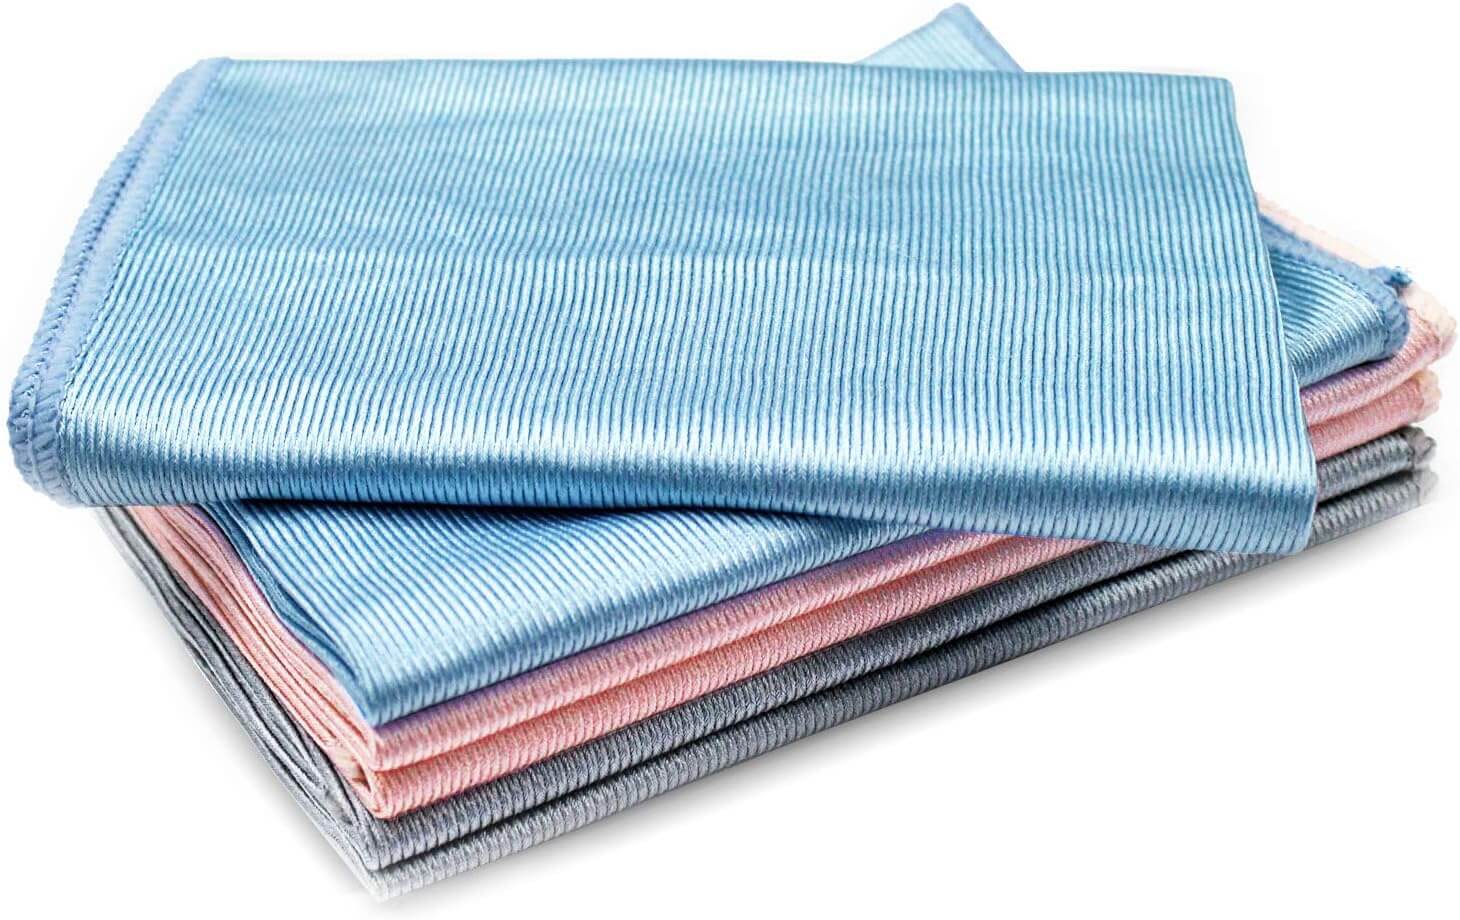 ZERLA Microfiber Glass Cleaning Cloths Streak Free - Lint Free - Quickly Clean Windows, Windshields, Mirrors, and Stainless Steel- 6 Pack